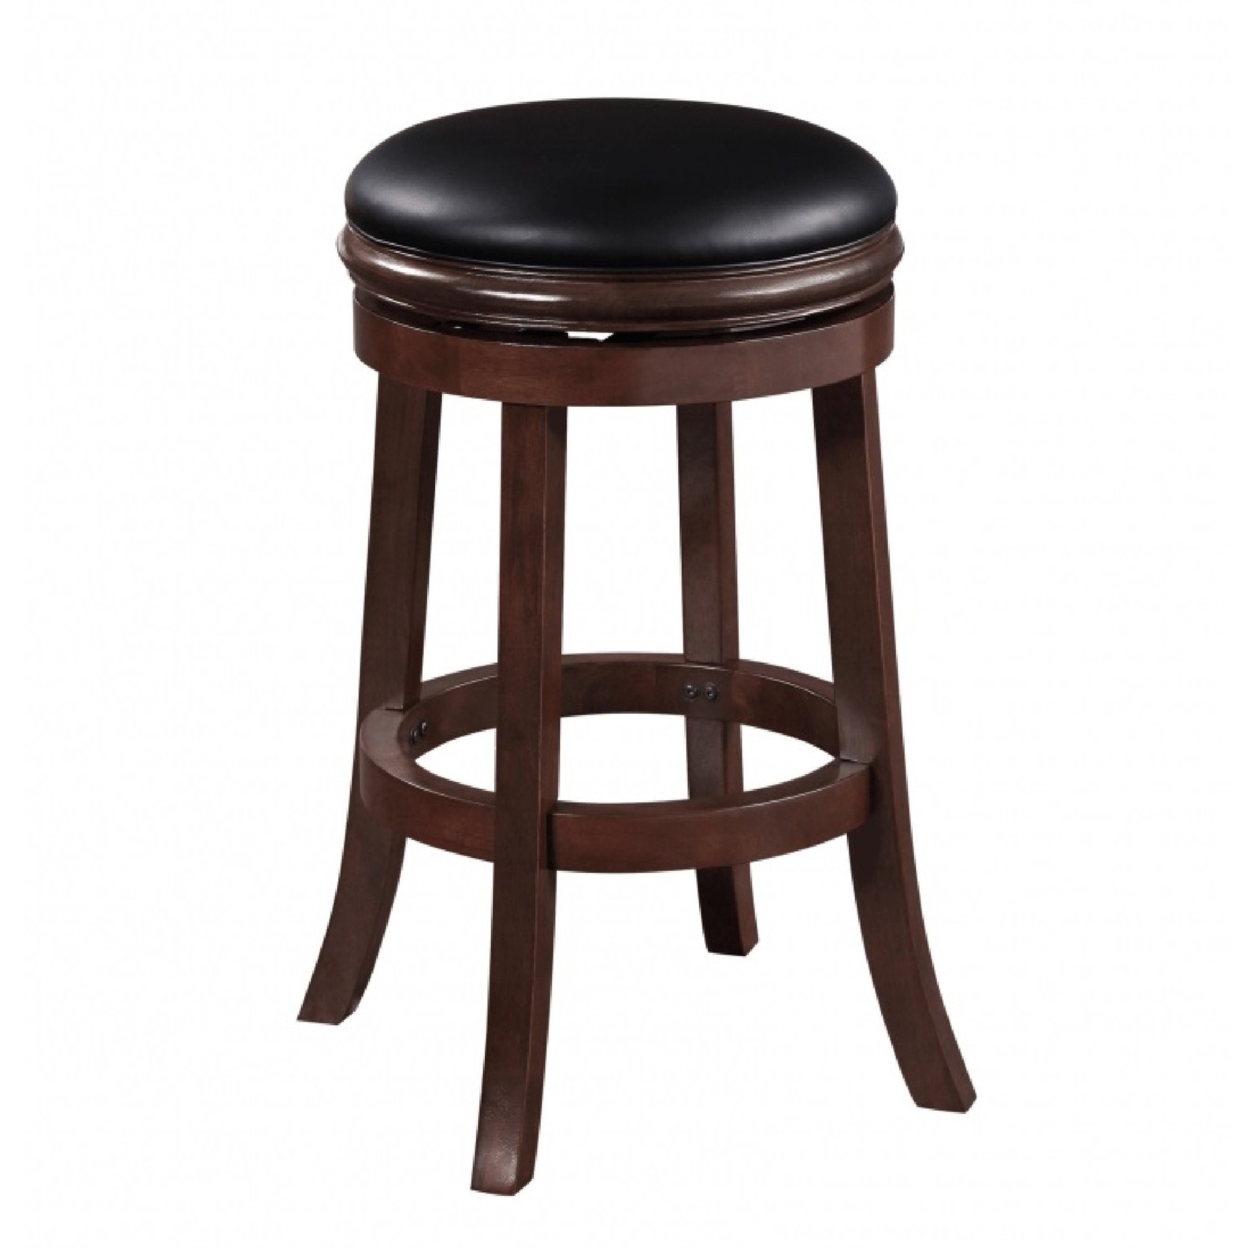 Sabi 29 Inch Swivel Counter Stool, Backless, Solid Wood, Faux Leather, Espresso Brown, Black